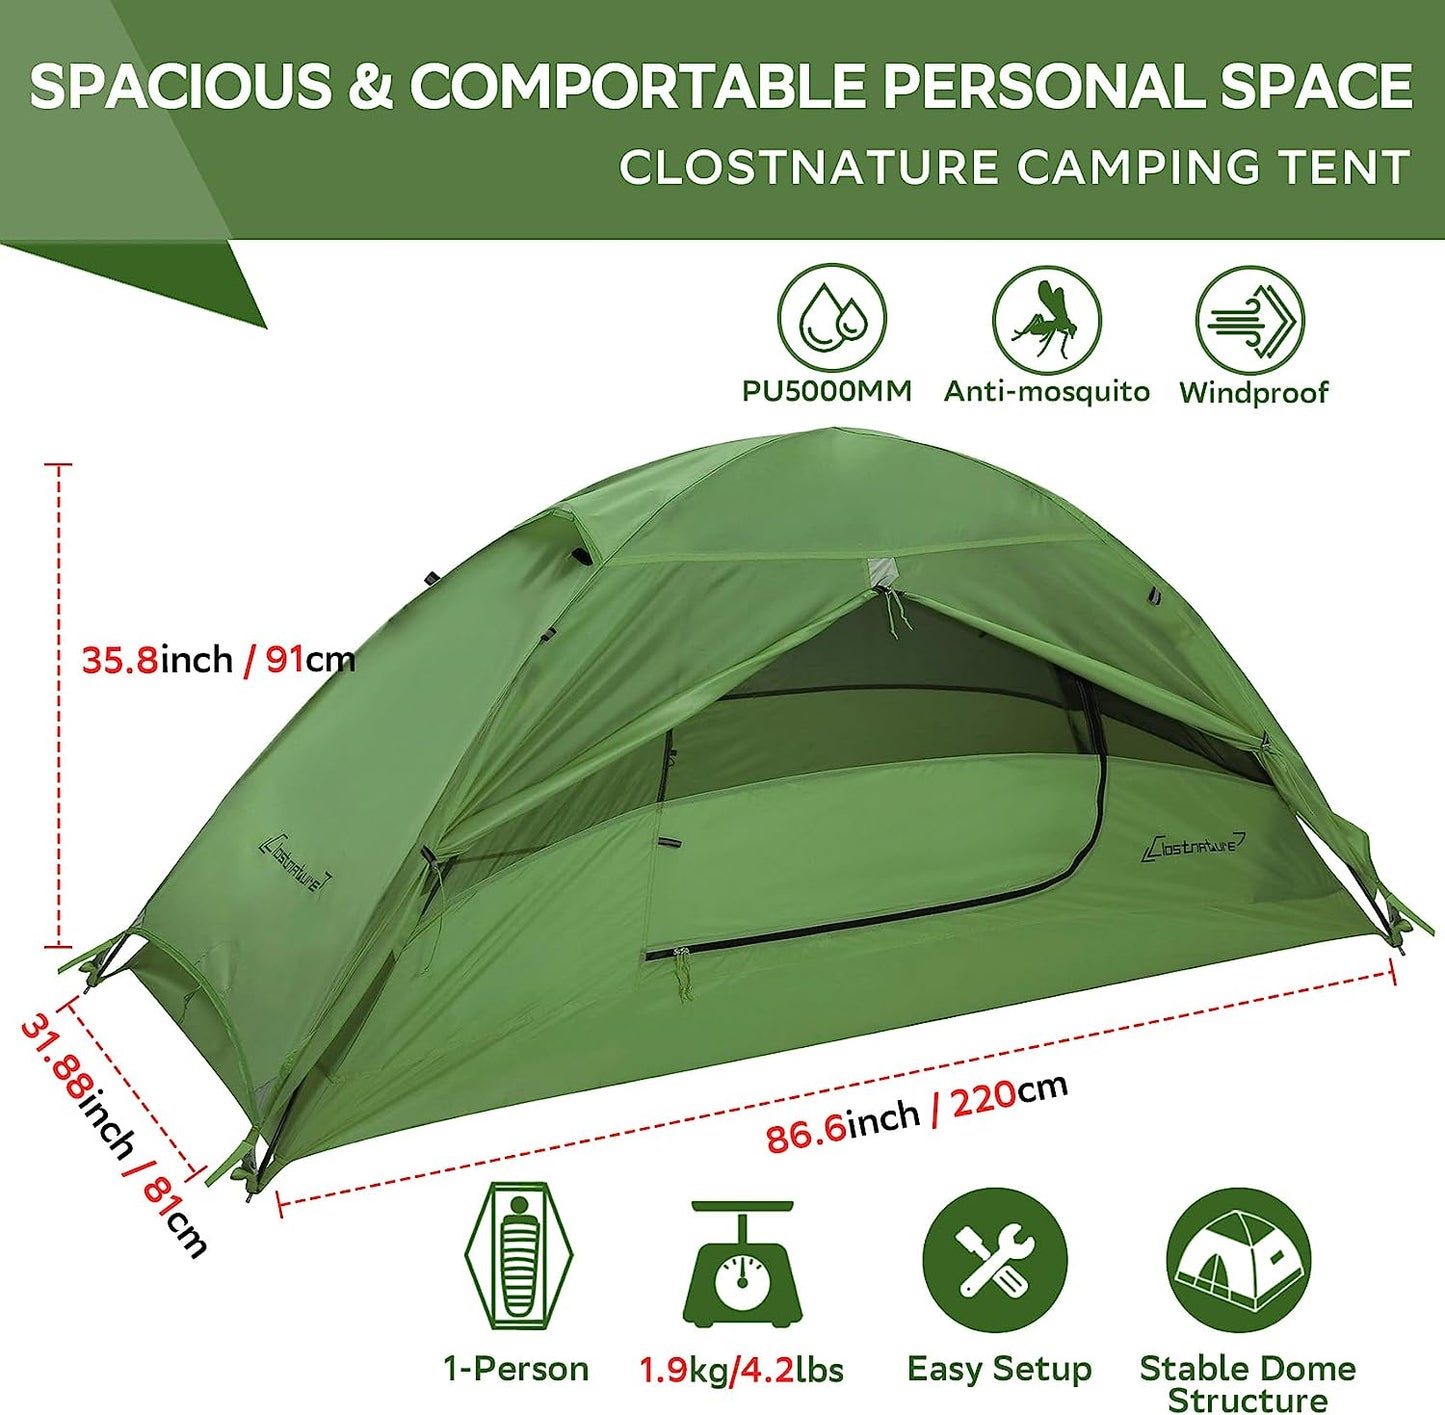 1-Person Tent for Backpacking - Ultralight One Person Backpacking Tent, Hiking Tent for One Man, Solo, Single Person